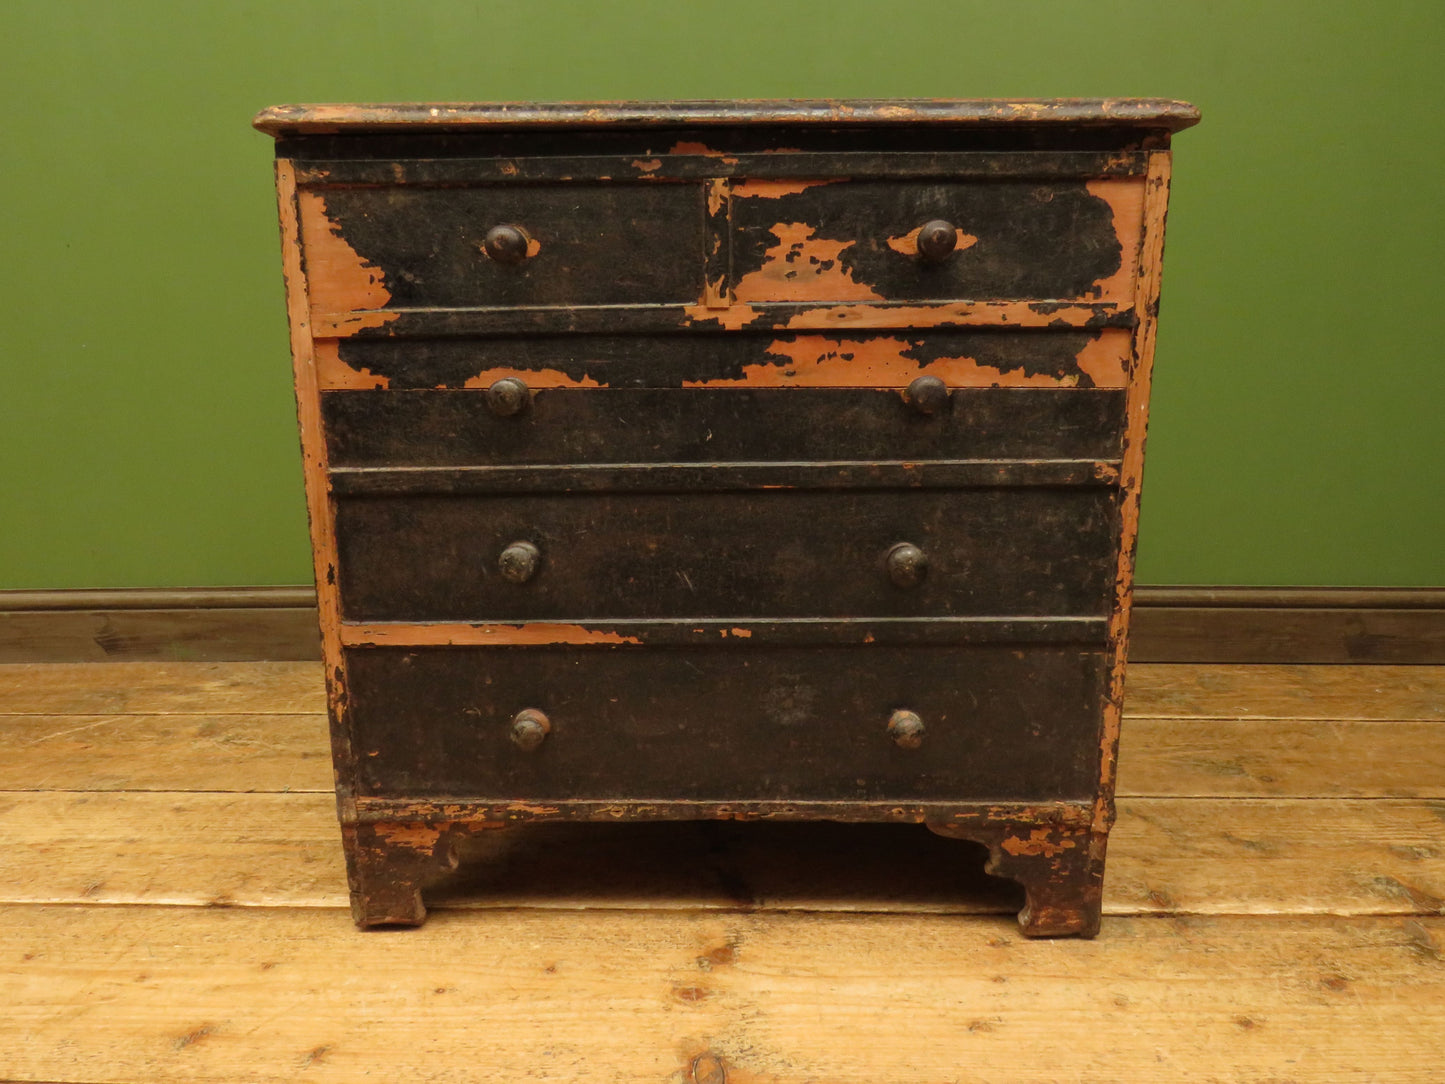 Rare Georgian Flour Hutch Lift Top Chest in Original Old Painted Finish